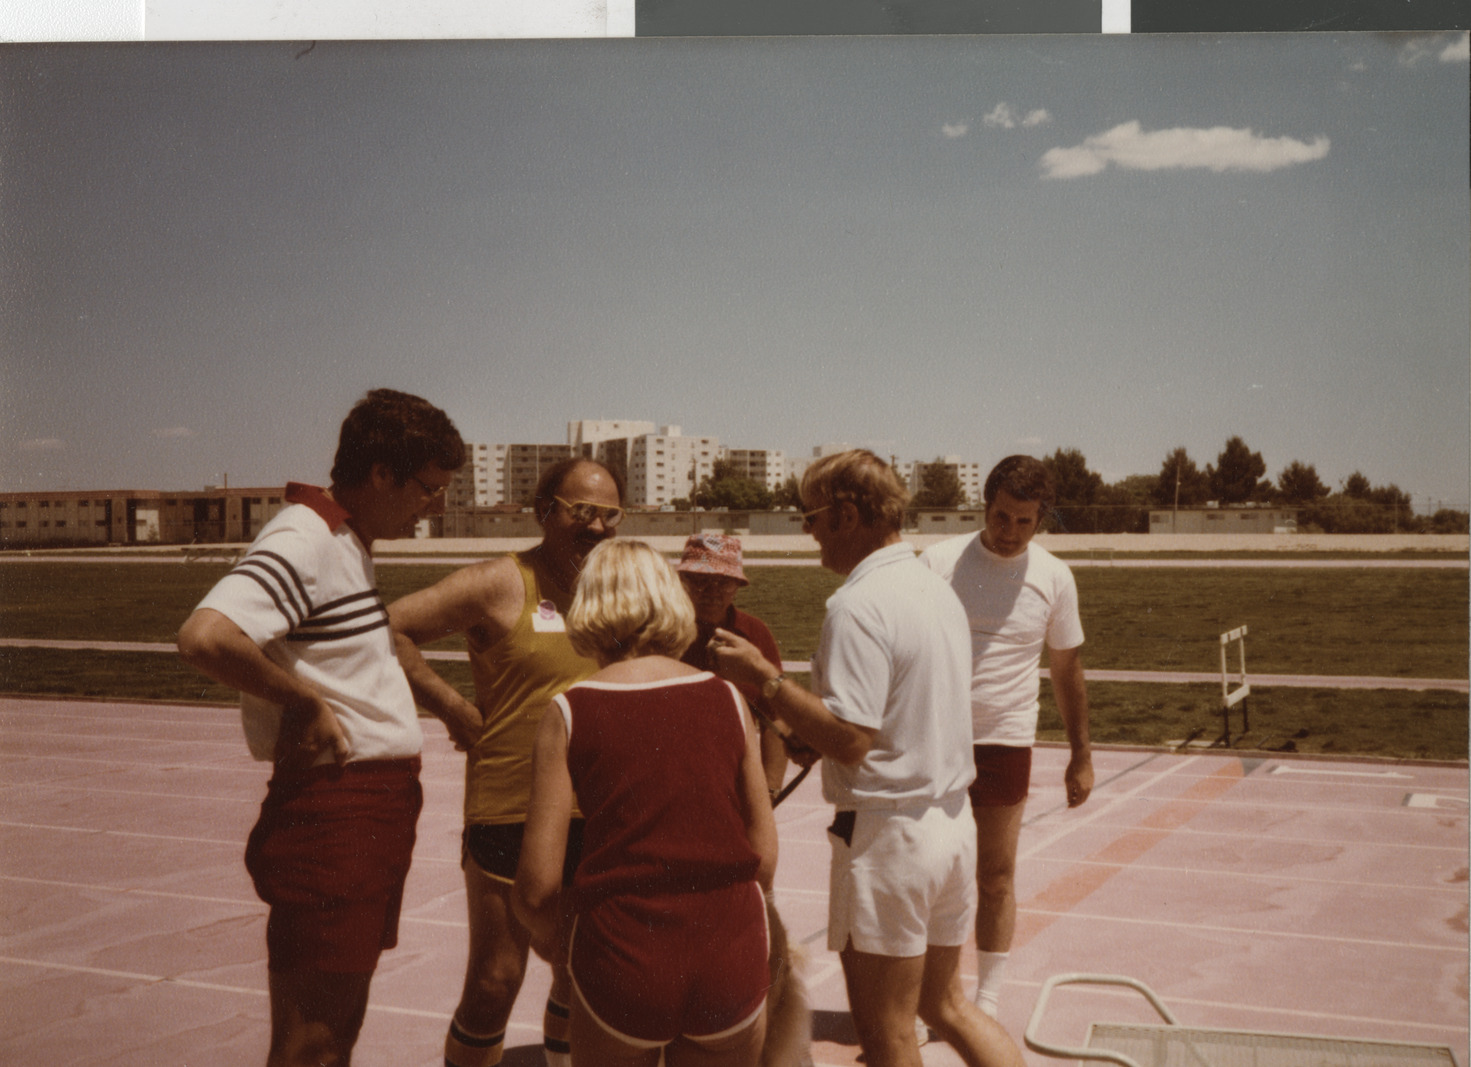 Photograph of Ron Lurie and others on a track